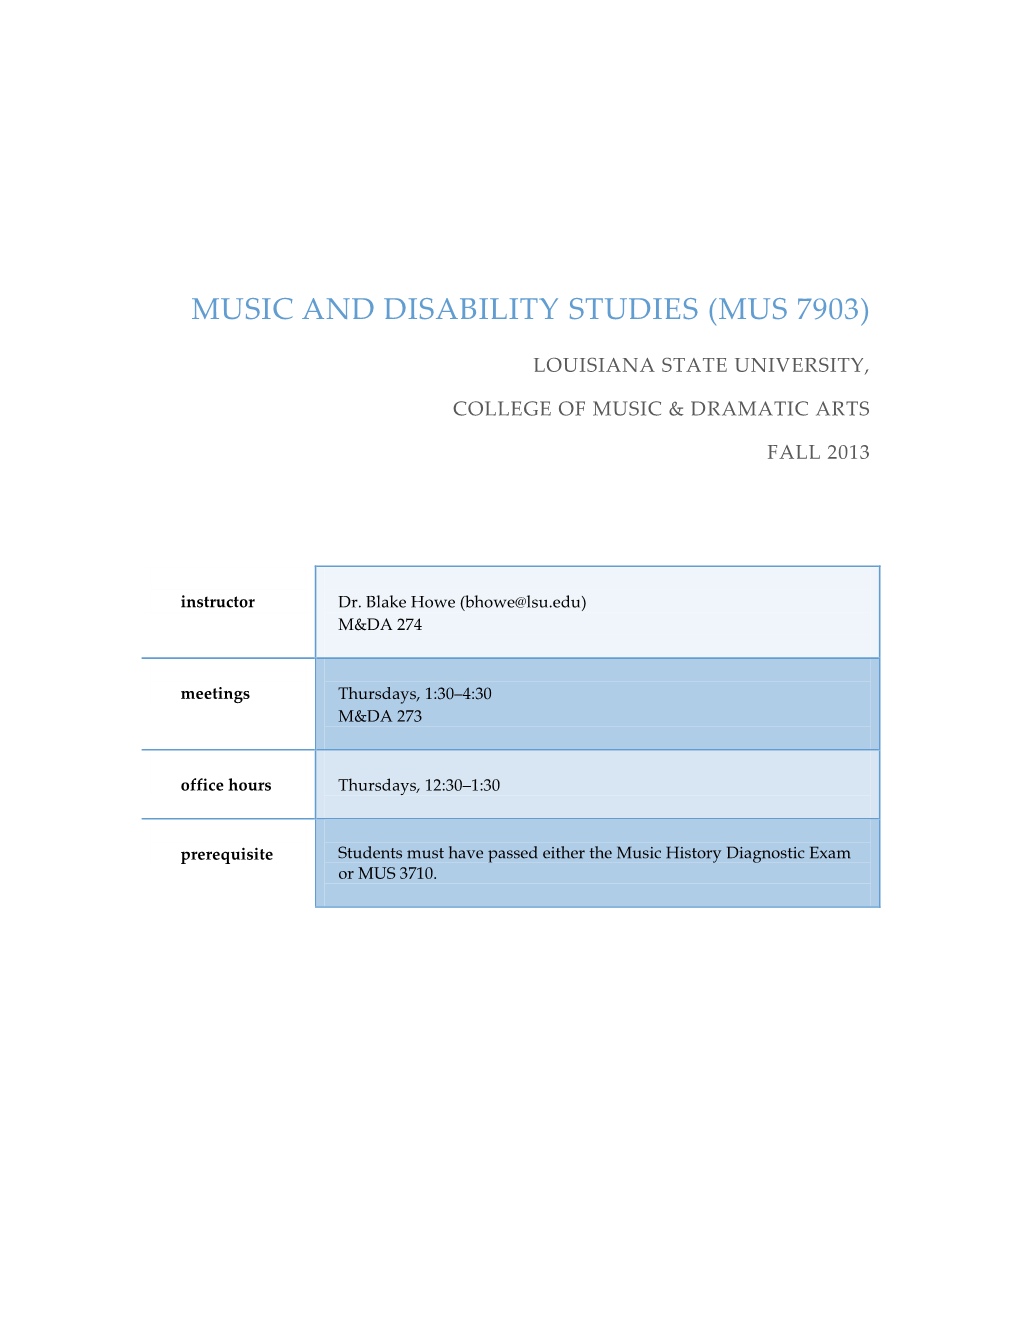 Music and Disability Studies (Mus 7903)